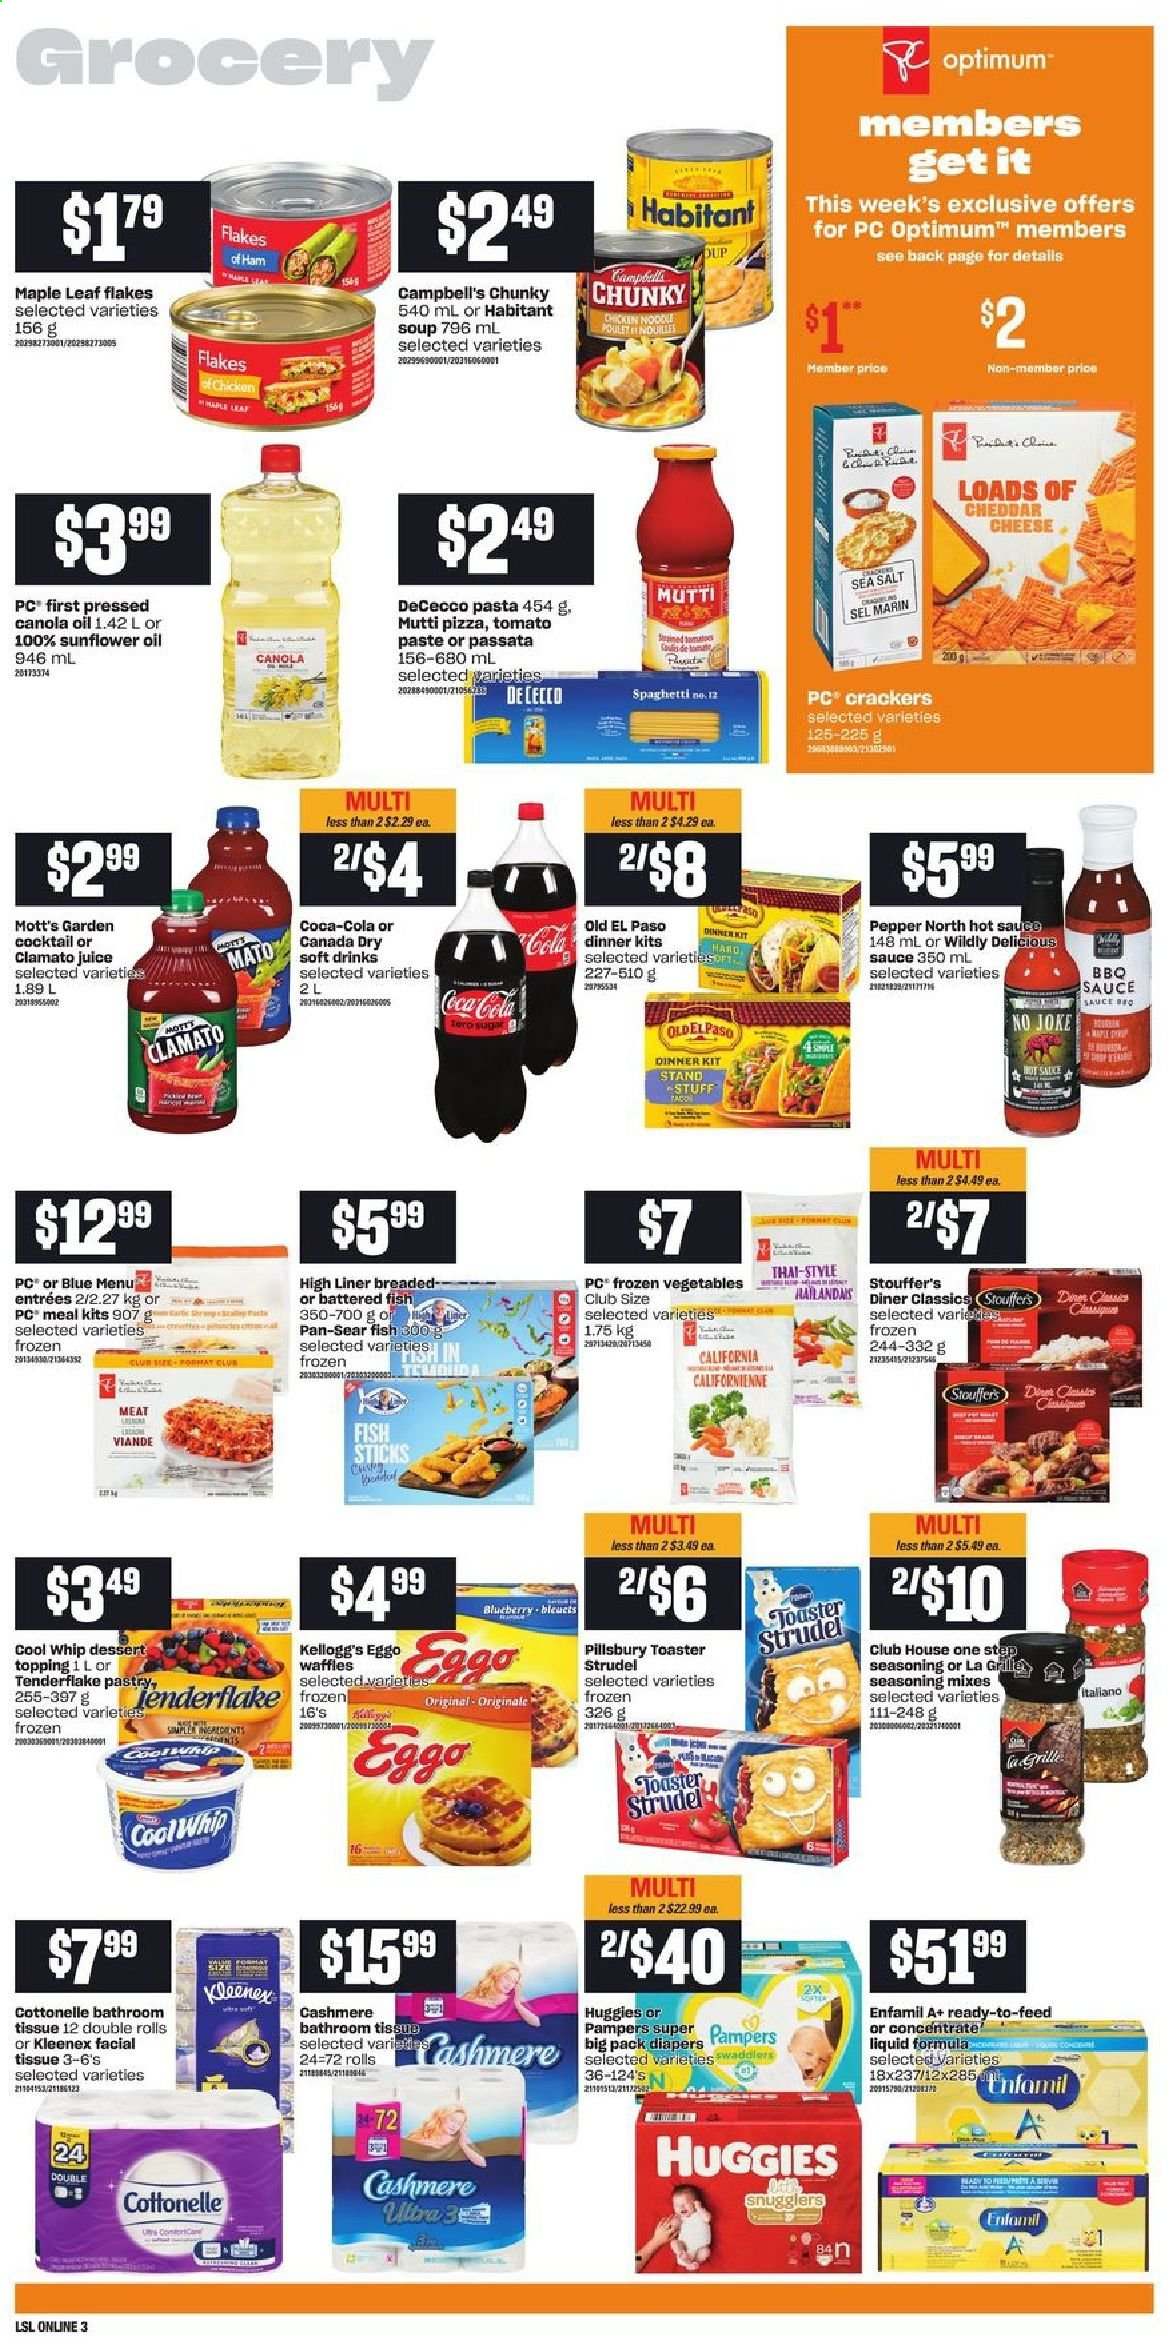 thumbnail - Loblaws Flyer - May 20, 2021 - May 26, 2021 - Sales products - strudel, Old El Paso, waffles, Mott's, fish, fish fingers, fish sticks, Campbell's, spaghetti, pizza, soup, pasta, sauce, Pillsbury, dinner kit, noodles, ham, cheddar, Cool Whip, frozen vegetables, Stouffer's, crackers, Kellogg's, topping, tomato paste, pepper, spice, BBQ sauce, hot sauce, canola oil, sunflower oil, oil, Canada Dry, Coca-Cola, juice, Clamato, soft drink, Enfamil, bath tissue, Cottonelle, Kleenex, Rin, Optimum, Huggies, Pampers. Page 7.